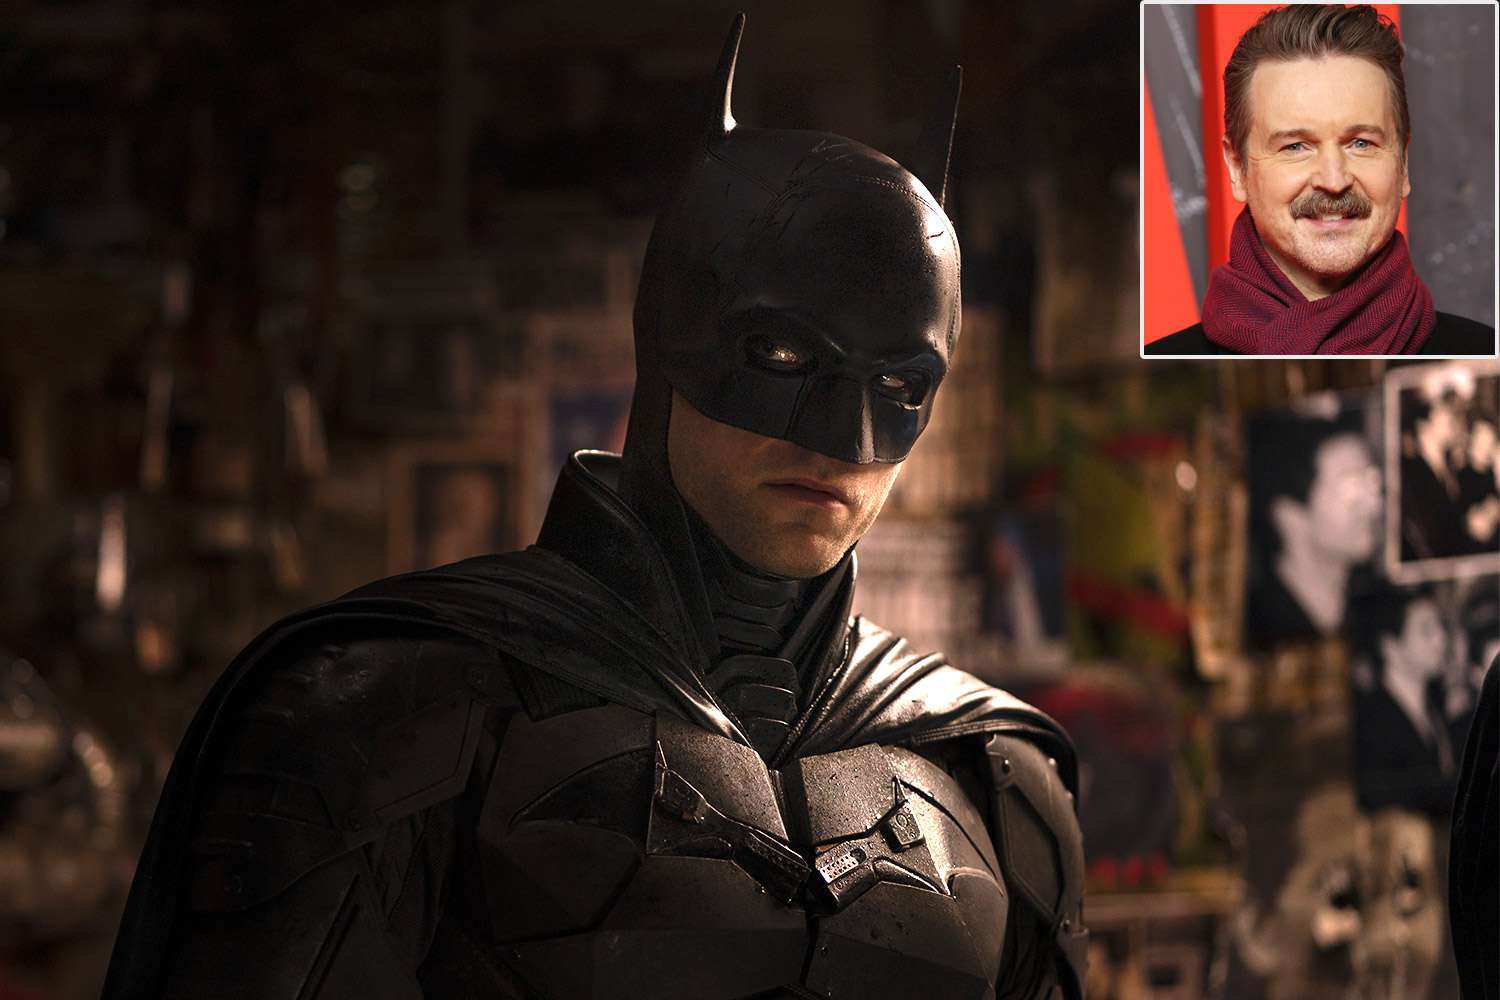 Fans Demand Redesign: Will Barry Keoghan's Joker Get a New Look in 'The Batman 2'?